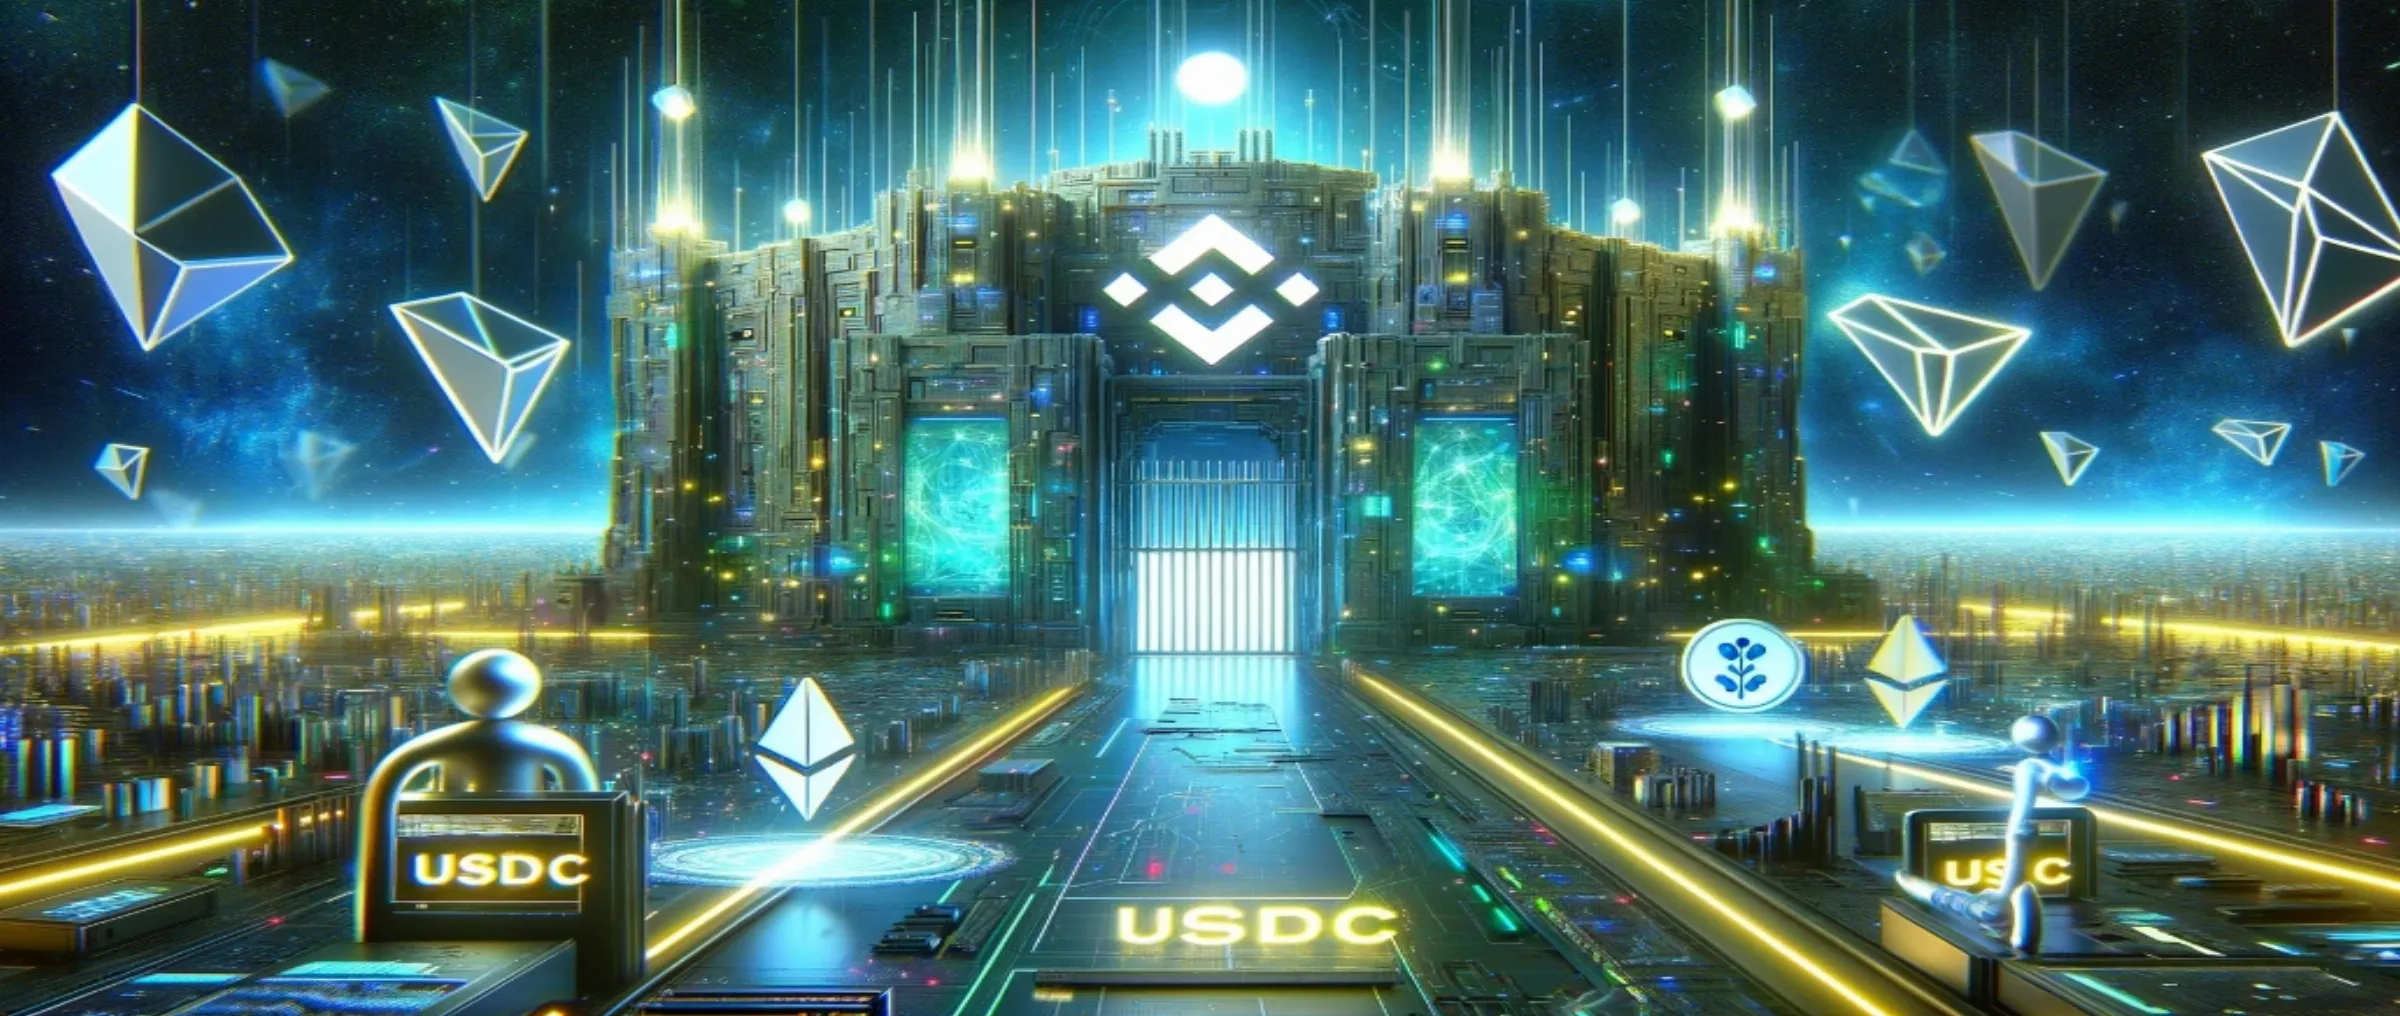 Binance will suspend USDC input and output operations on the TRON network